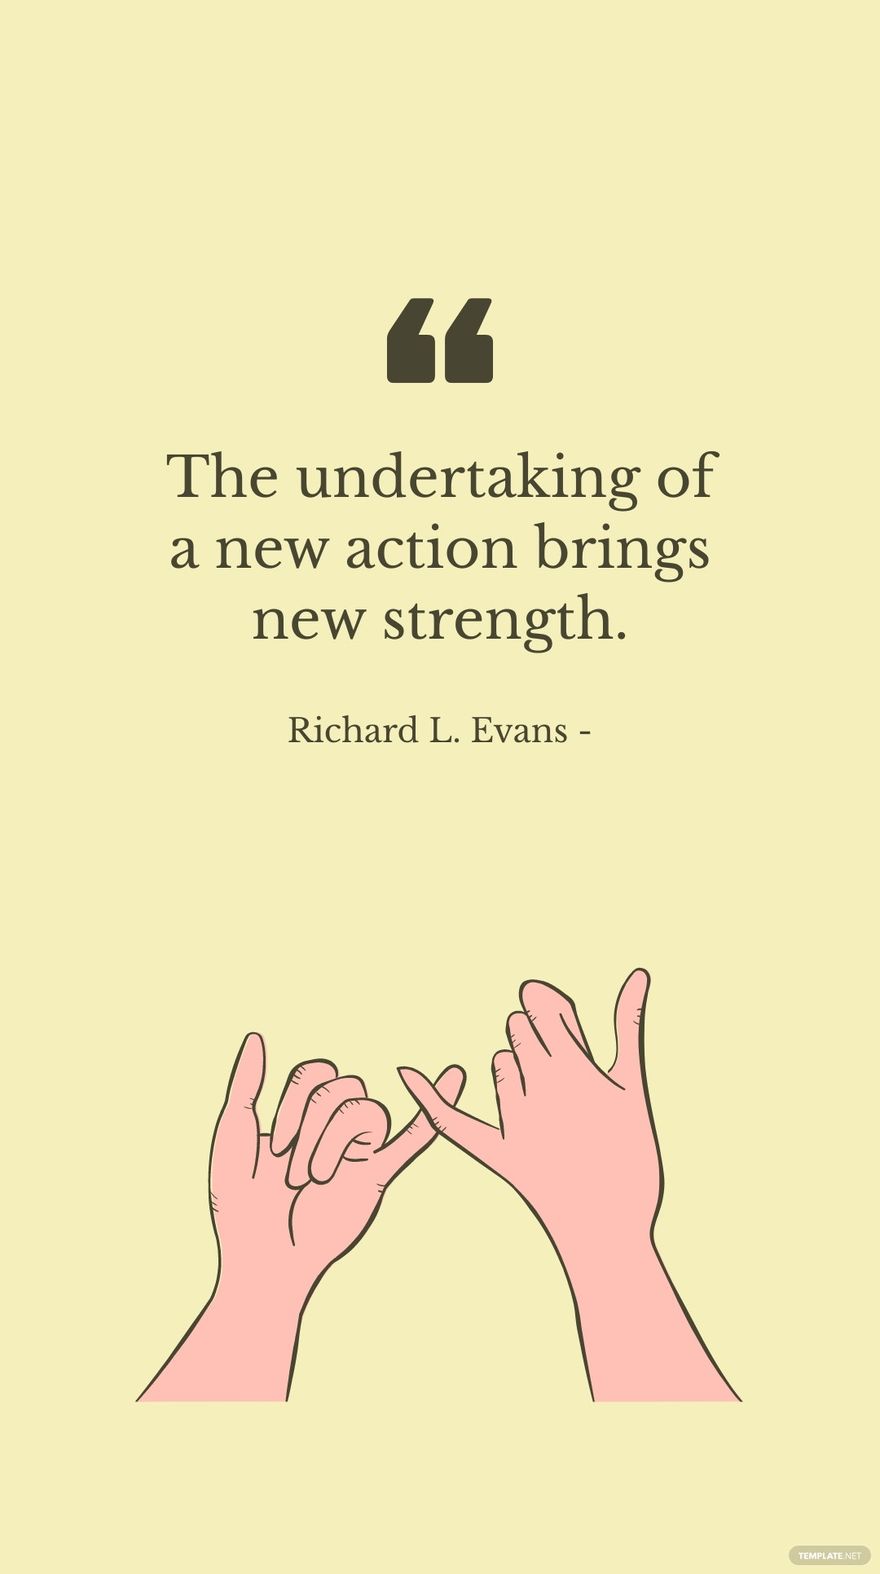 Free Richard L. Evans - The undertaking of a new action brings new strength. in JPG